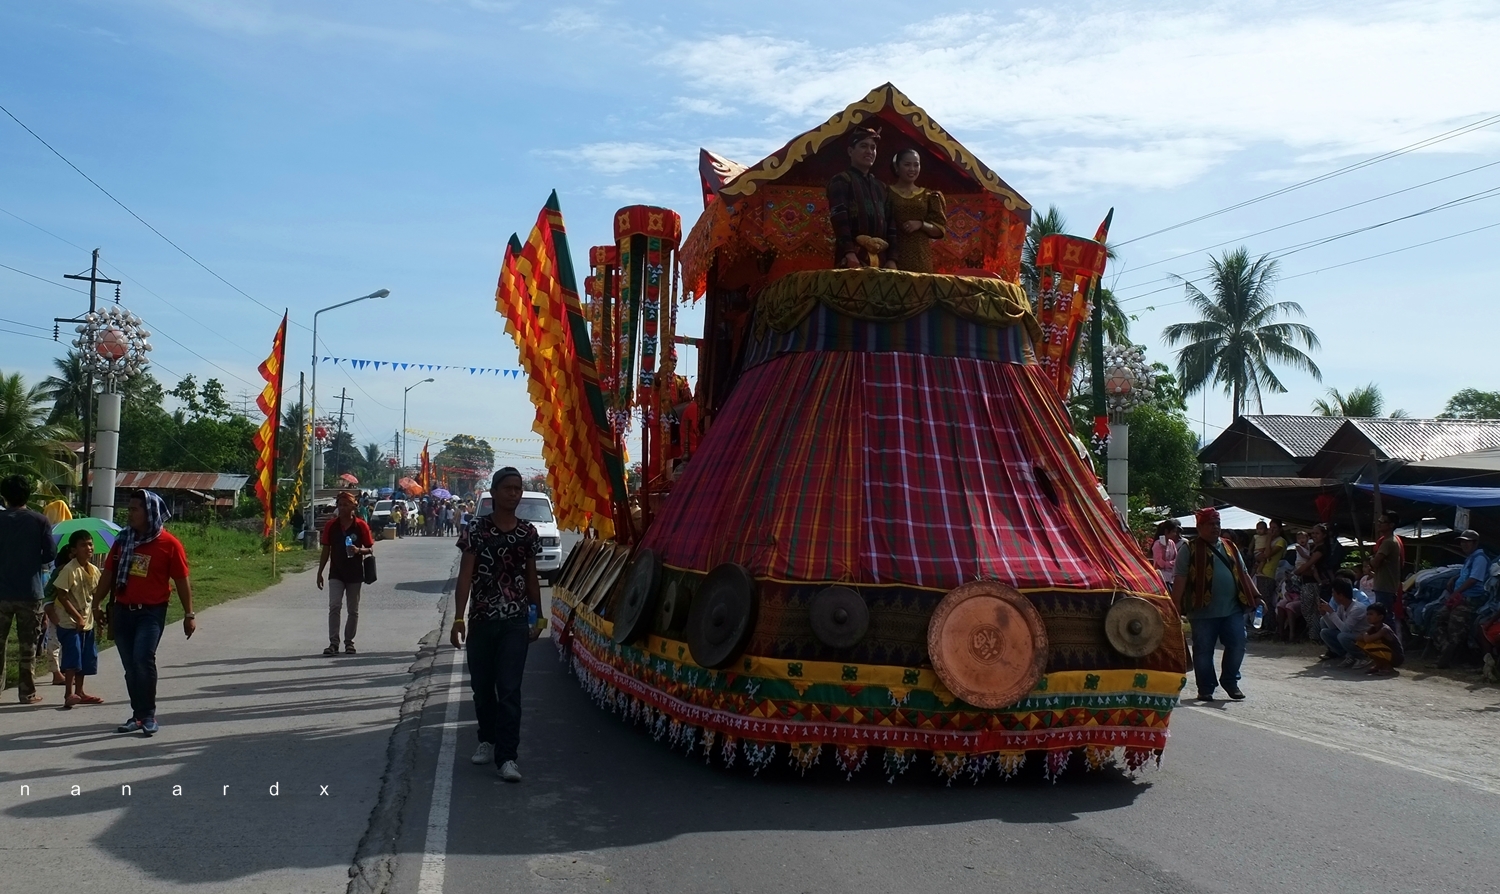 Inaul Festival Float Parade, An Amazing Display of Artistry and Culture